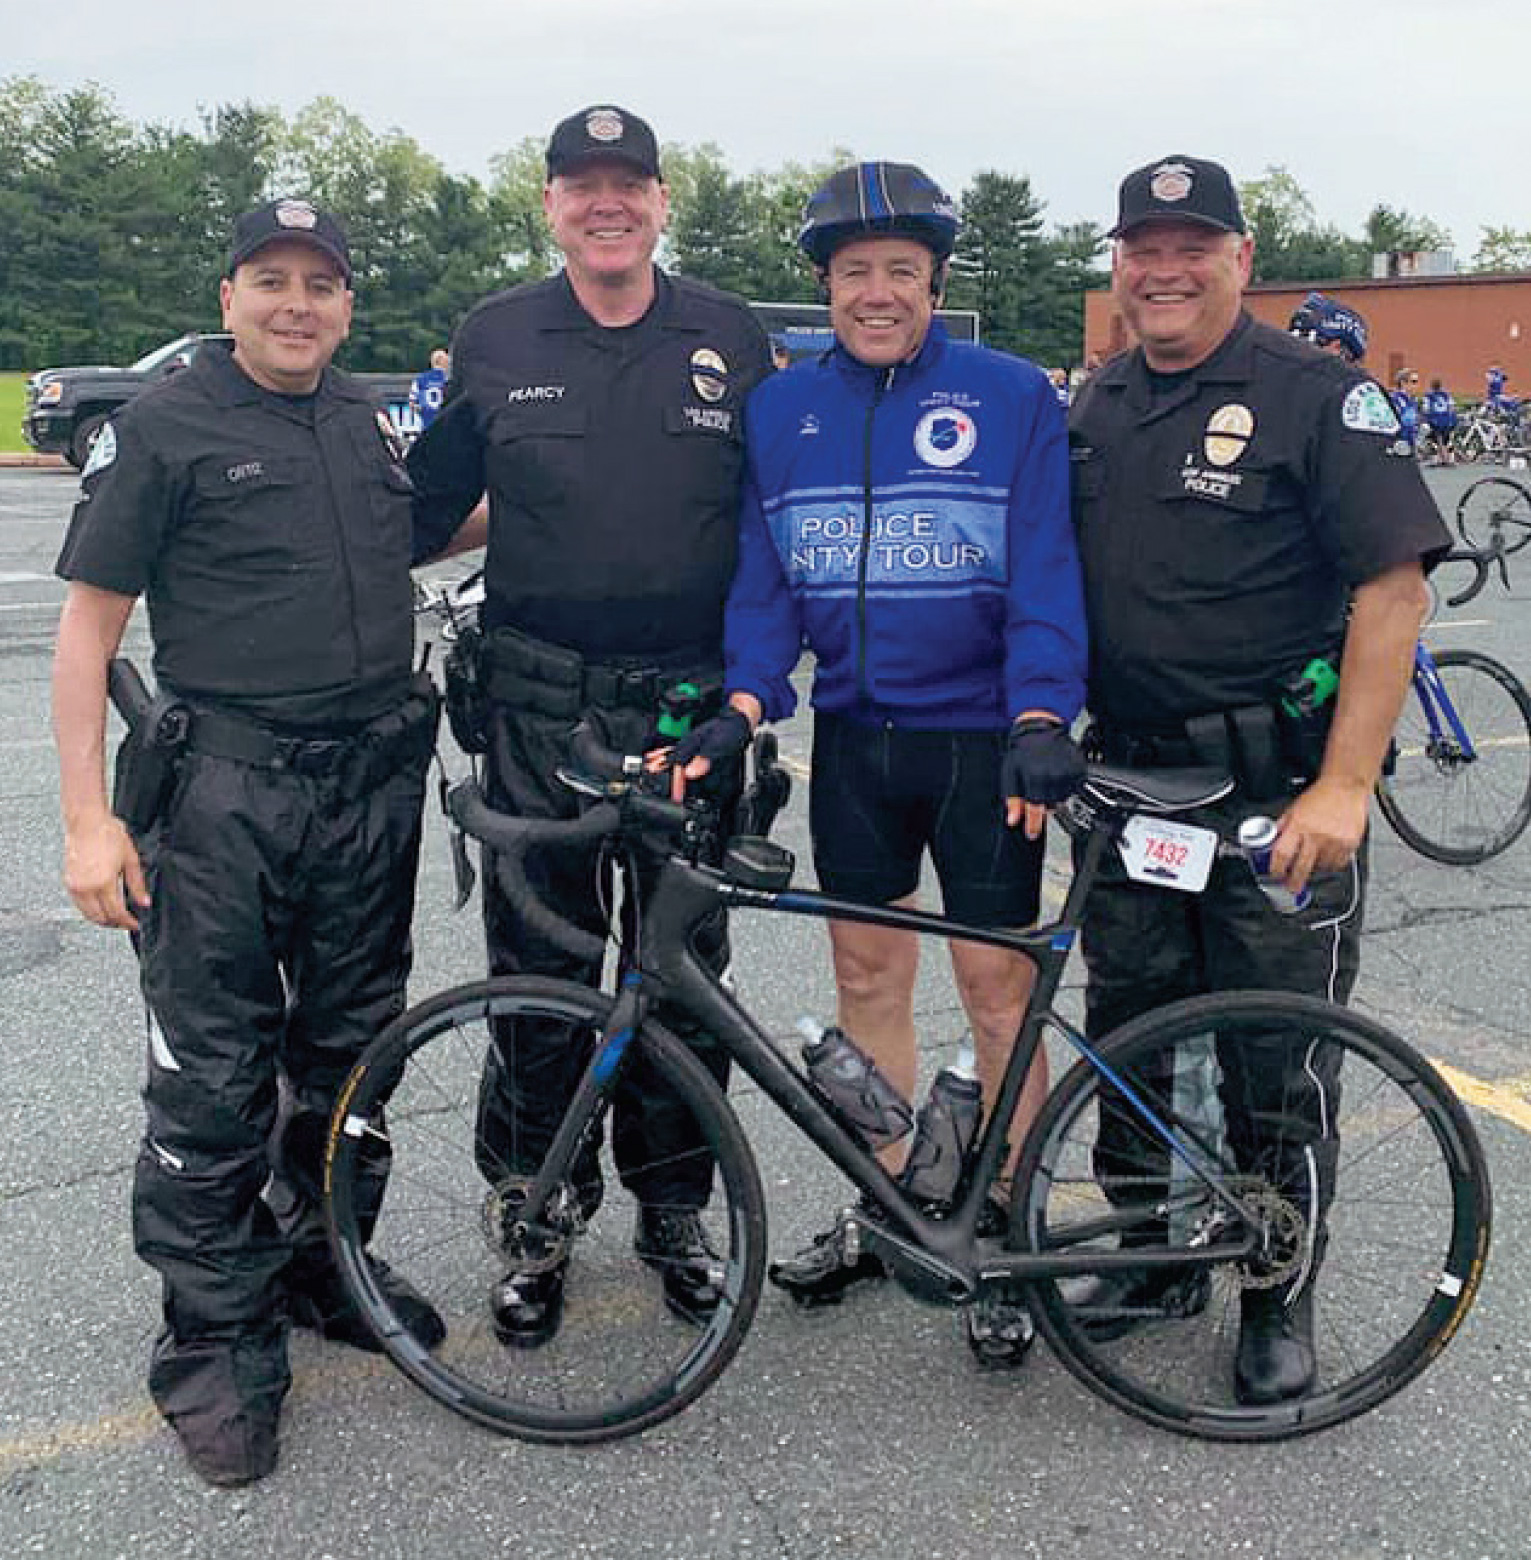 the police unity tour